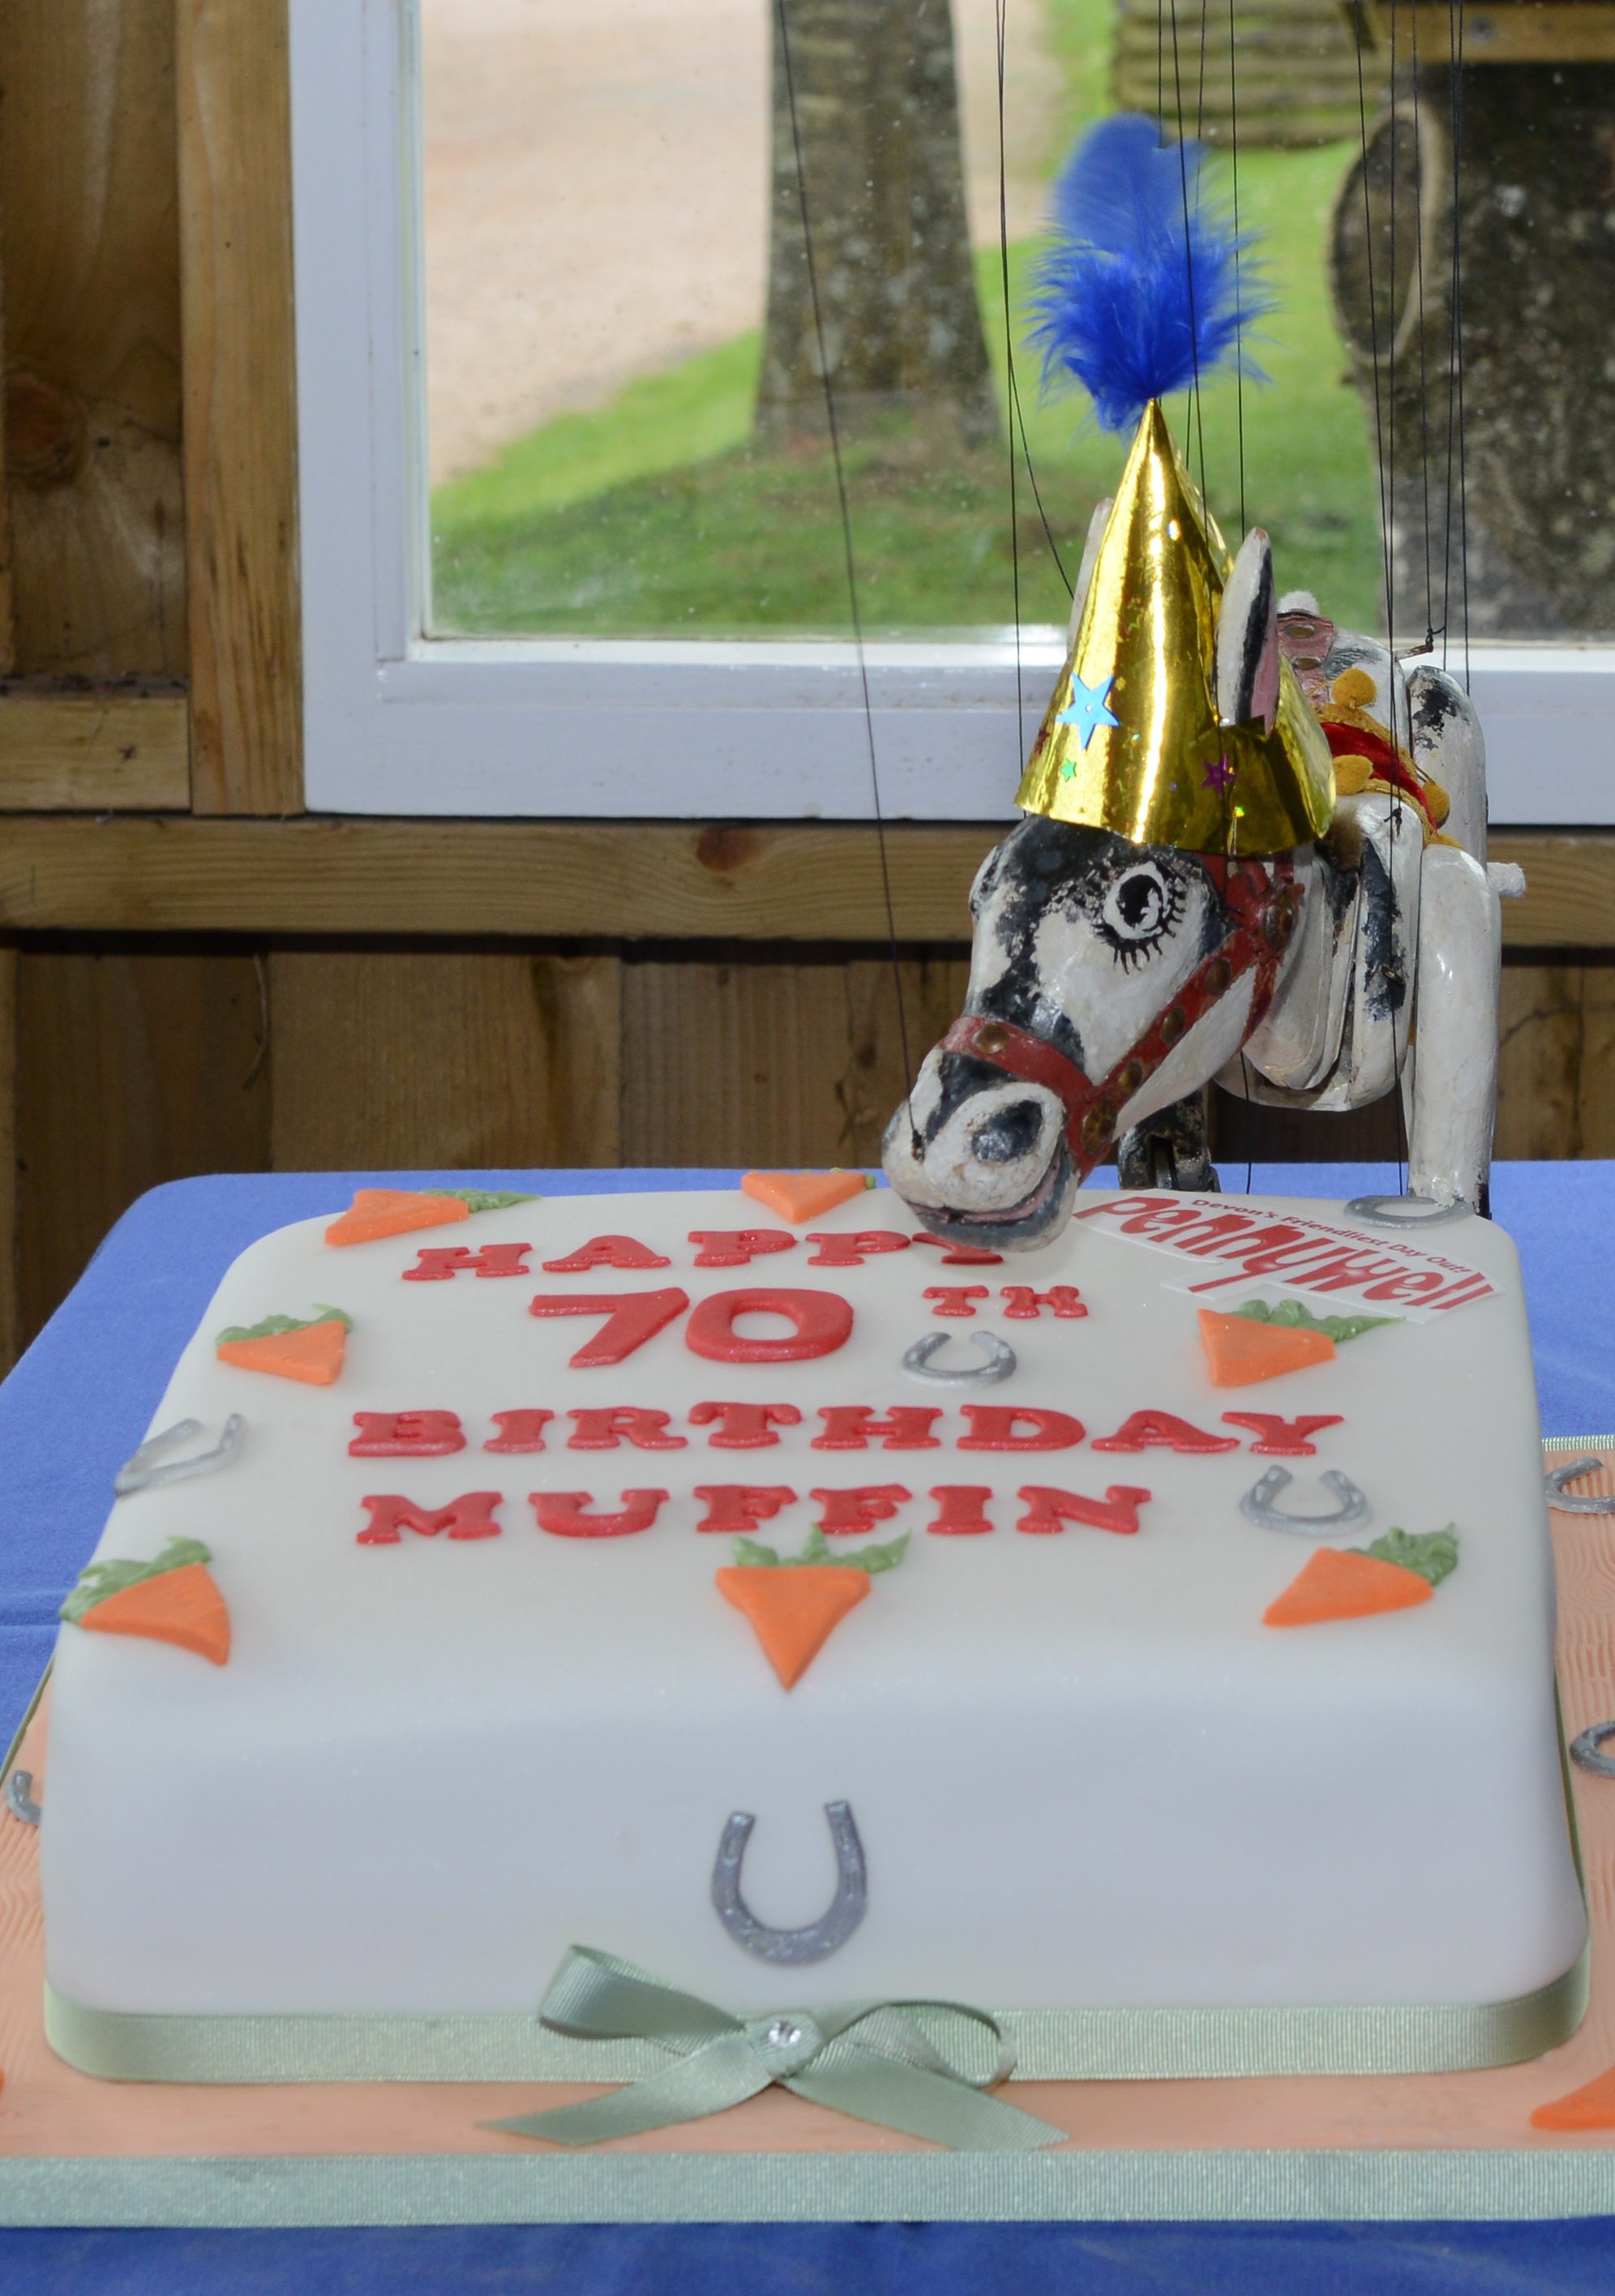 Muffin with his 70th Birthday cake